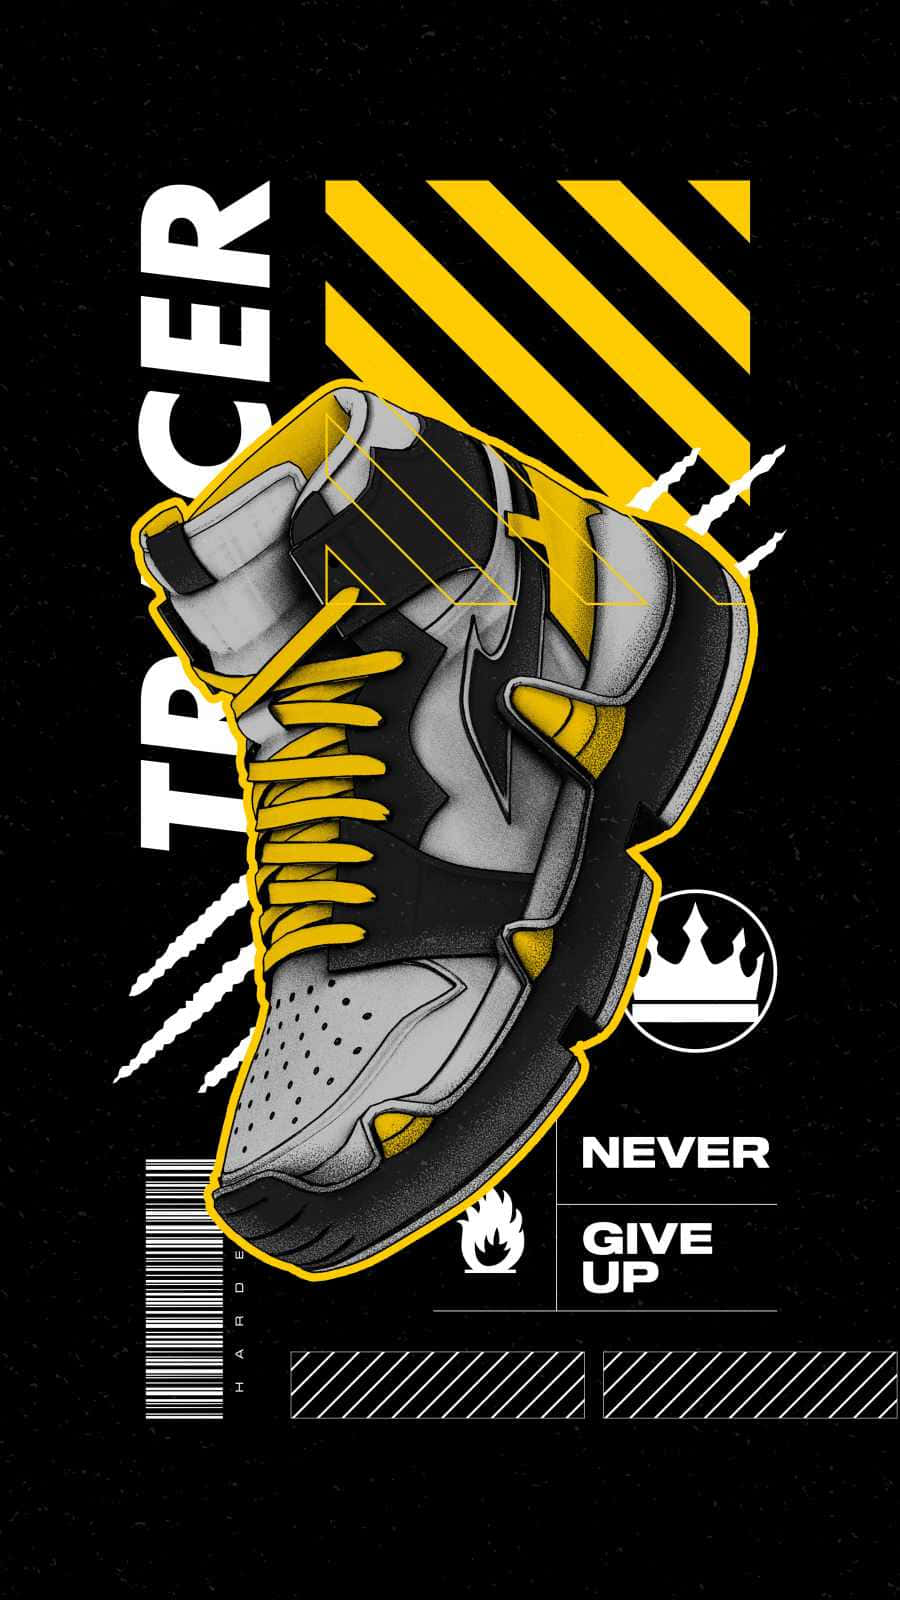 Stylish high-top sneakers on vibrant background